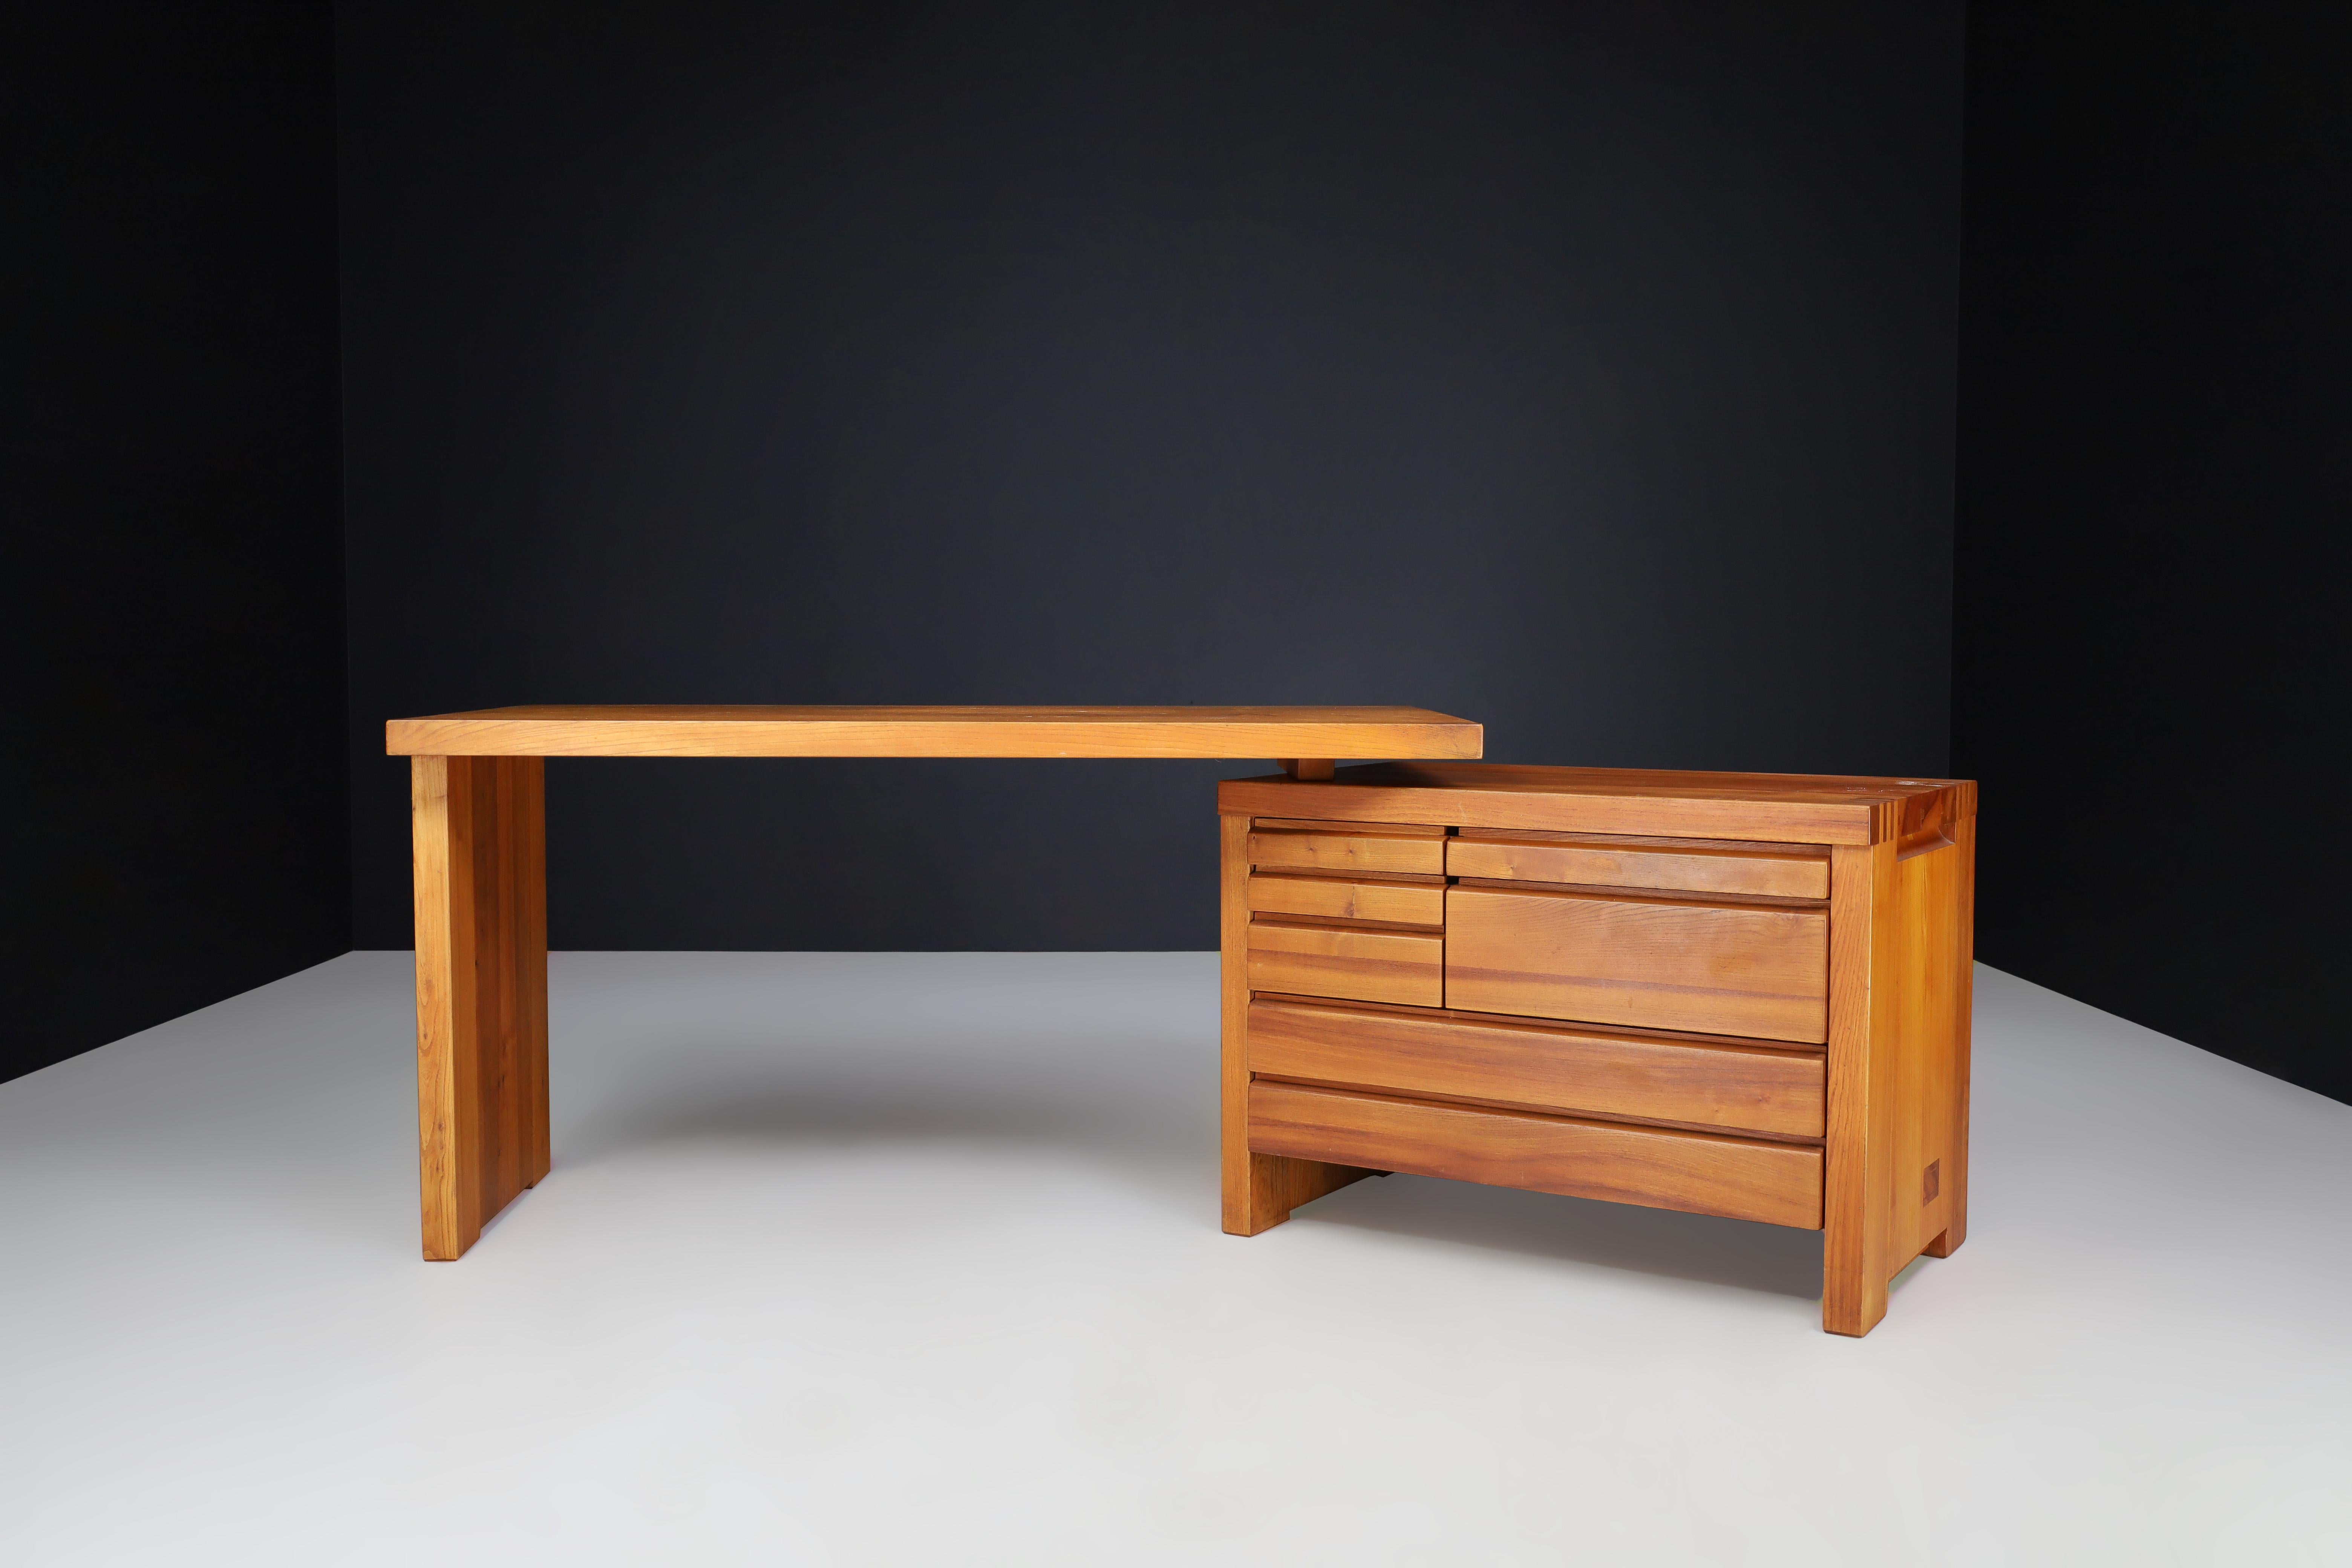 Pierre Chapo B19 Writing Desk in Patinated Solid Elm, France 1960s

This patinated Pierre Chapo B19 writing desk is made of Elmwood and was crafted in France in 1960. It was designed and manufactured by Pierre Chapo in his own atelier in Gordes. The